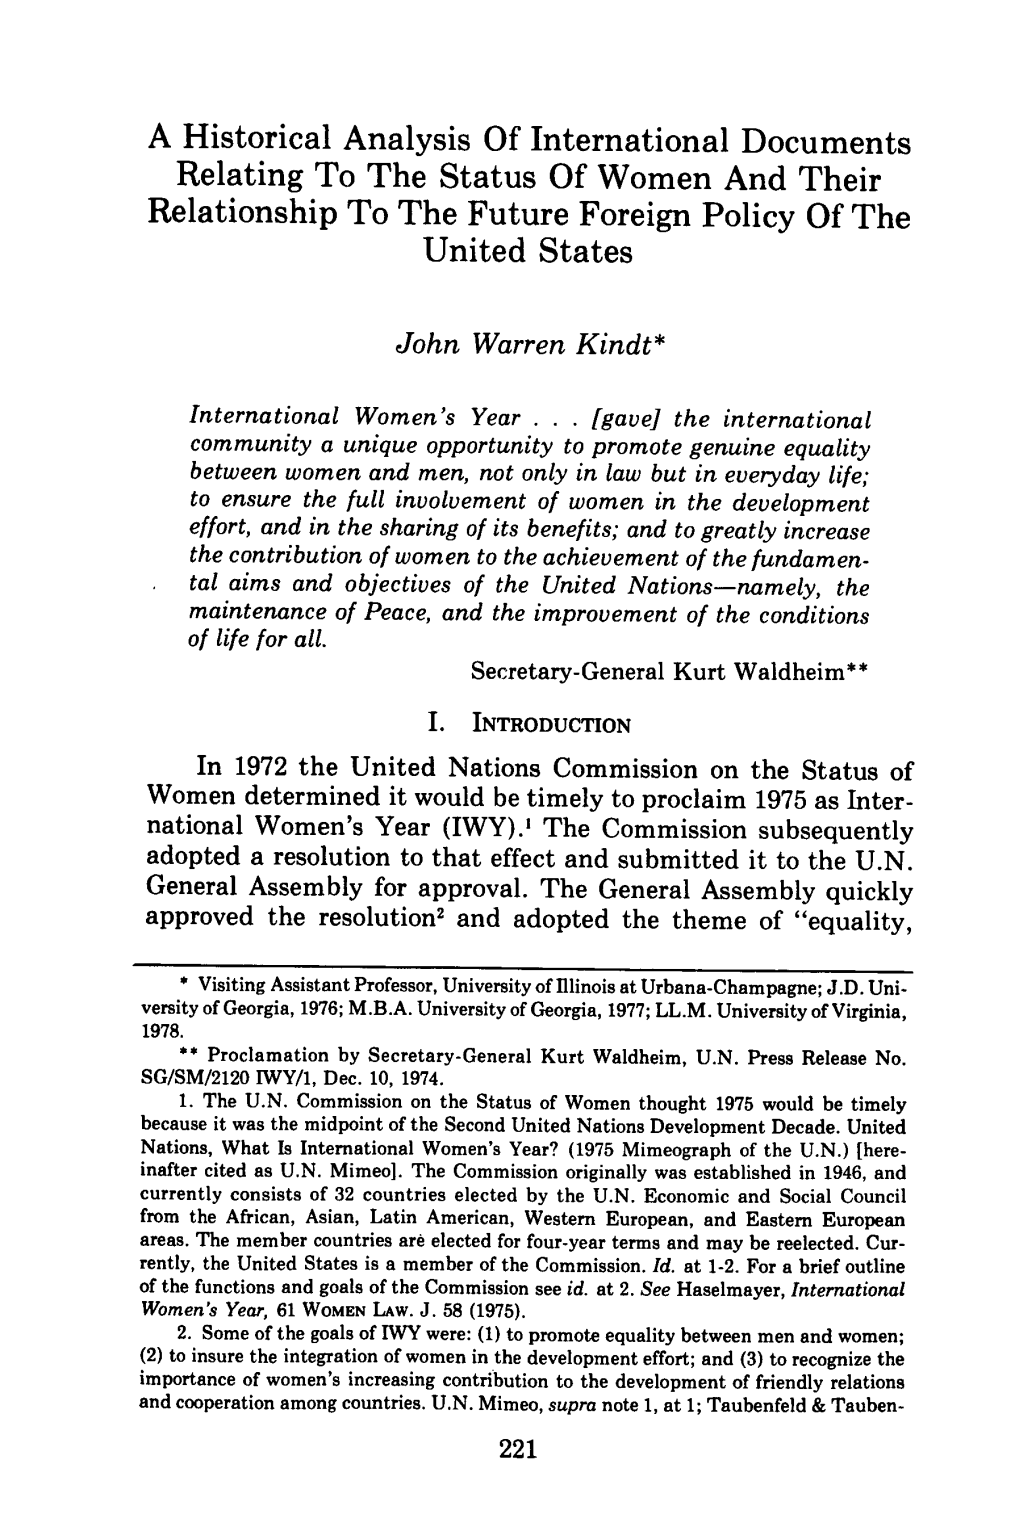 A Historical Analysis of International Documents Relating to the Status of Women and Their Relationship to the Future Foreign Policy of the United States